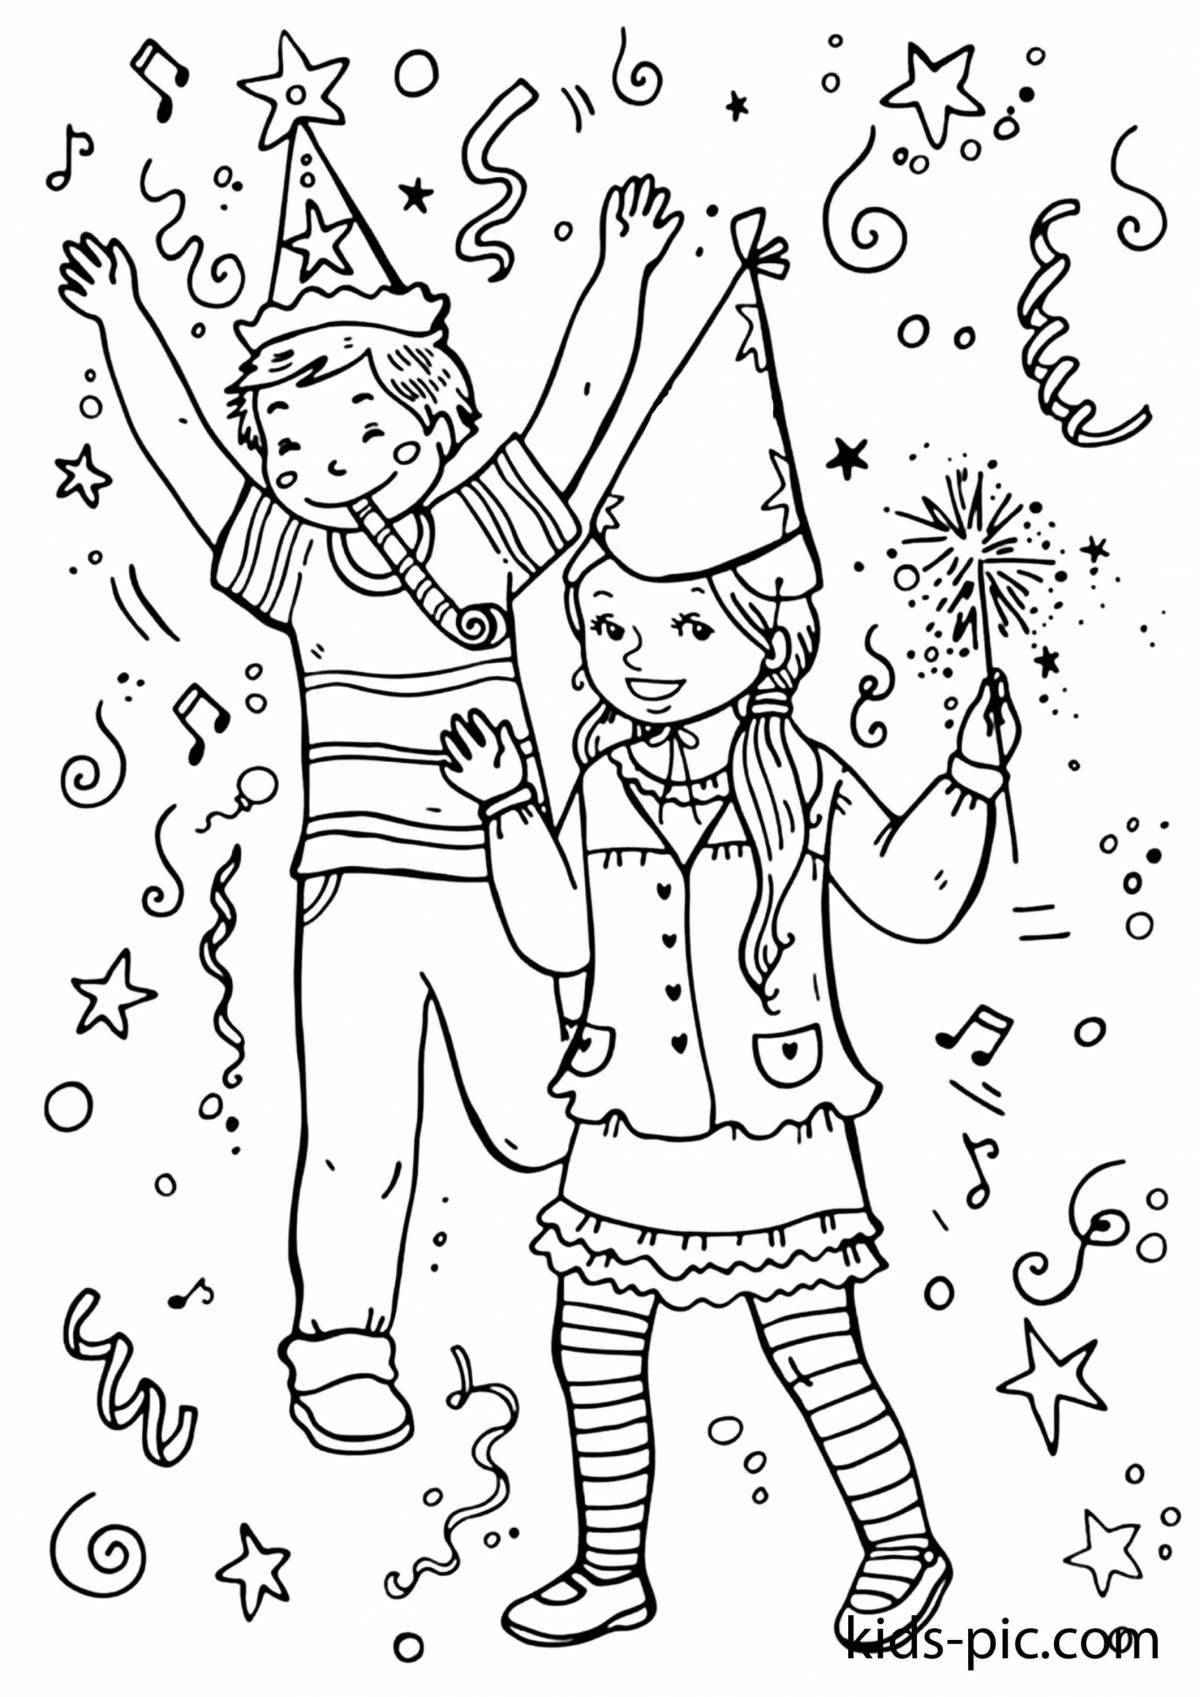 Sparkling sparklers coloring page